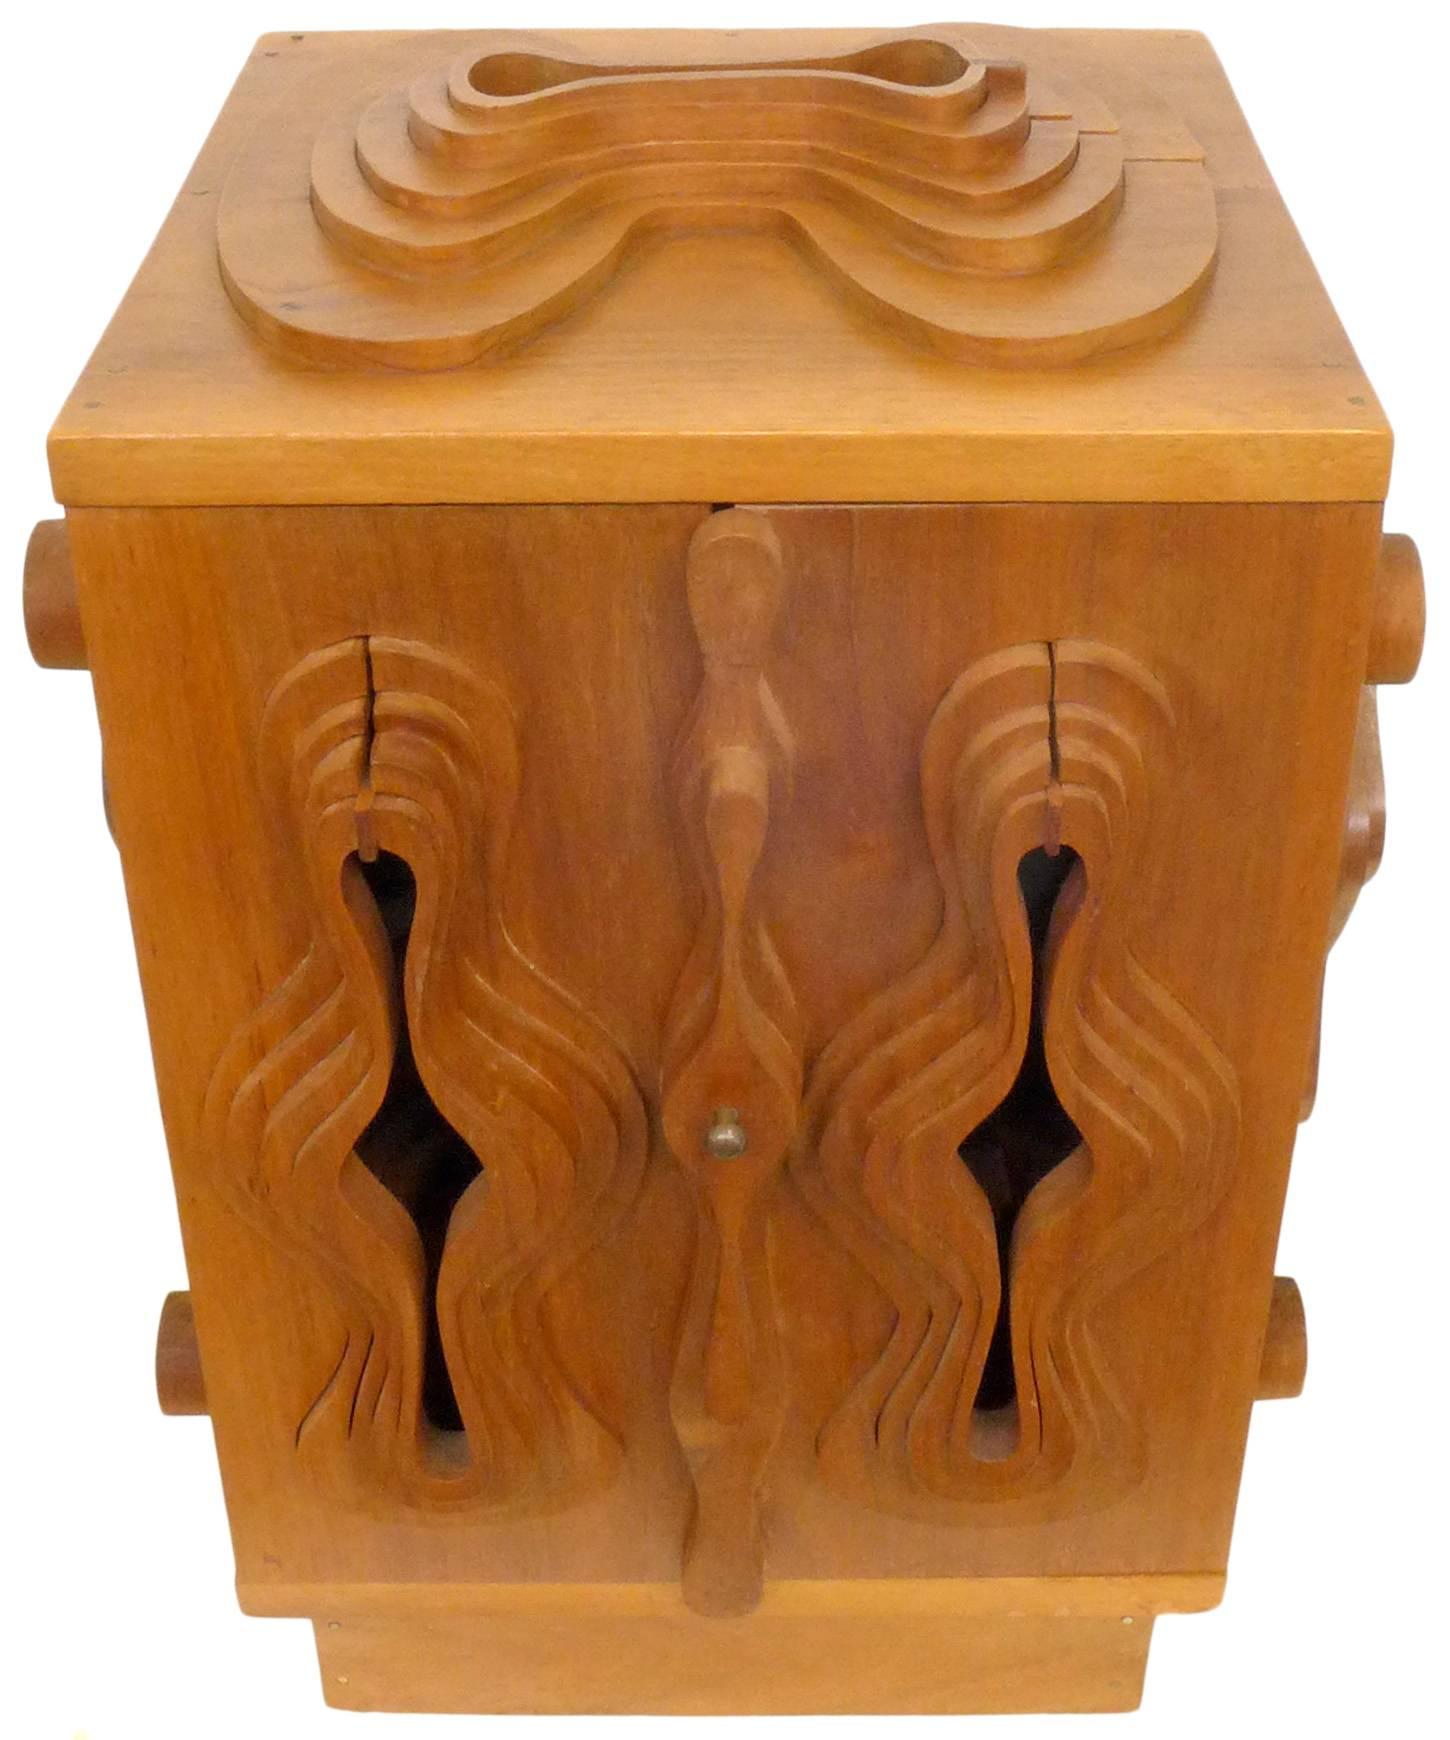 A wonderful and unusual sculpture cabinet by designer John Risley. Known for his furniture designs, Risley's talents veer into fine art as well, of which this cabinet is certainly an unusual example. A beautifully crafted cabinet with stepped,